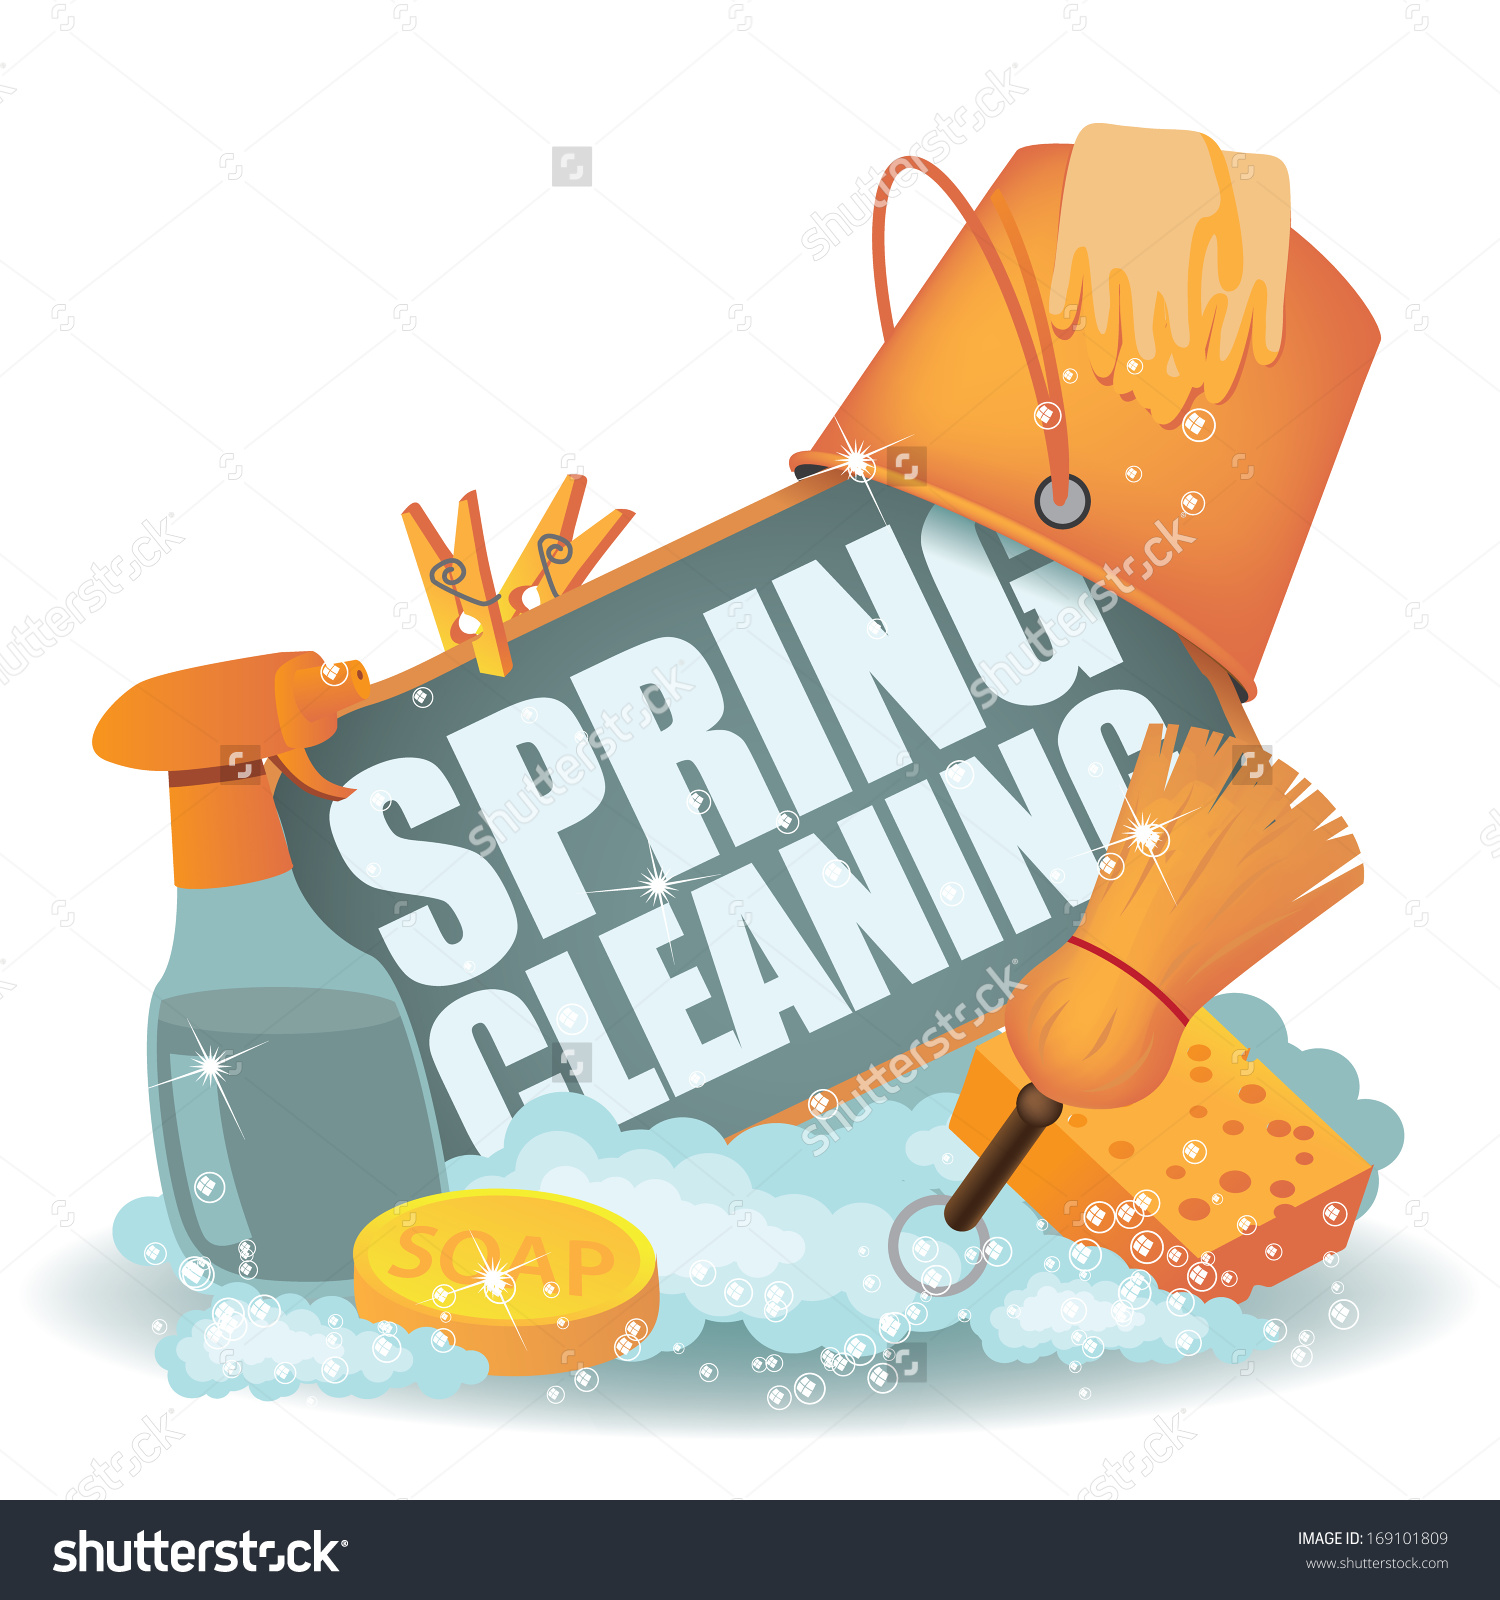 Spring Cleaning Icon. EPS 10 vector, grouped for easy editing. No open shapes